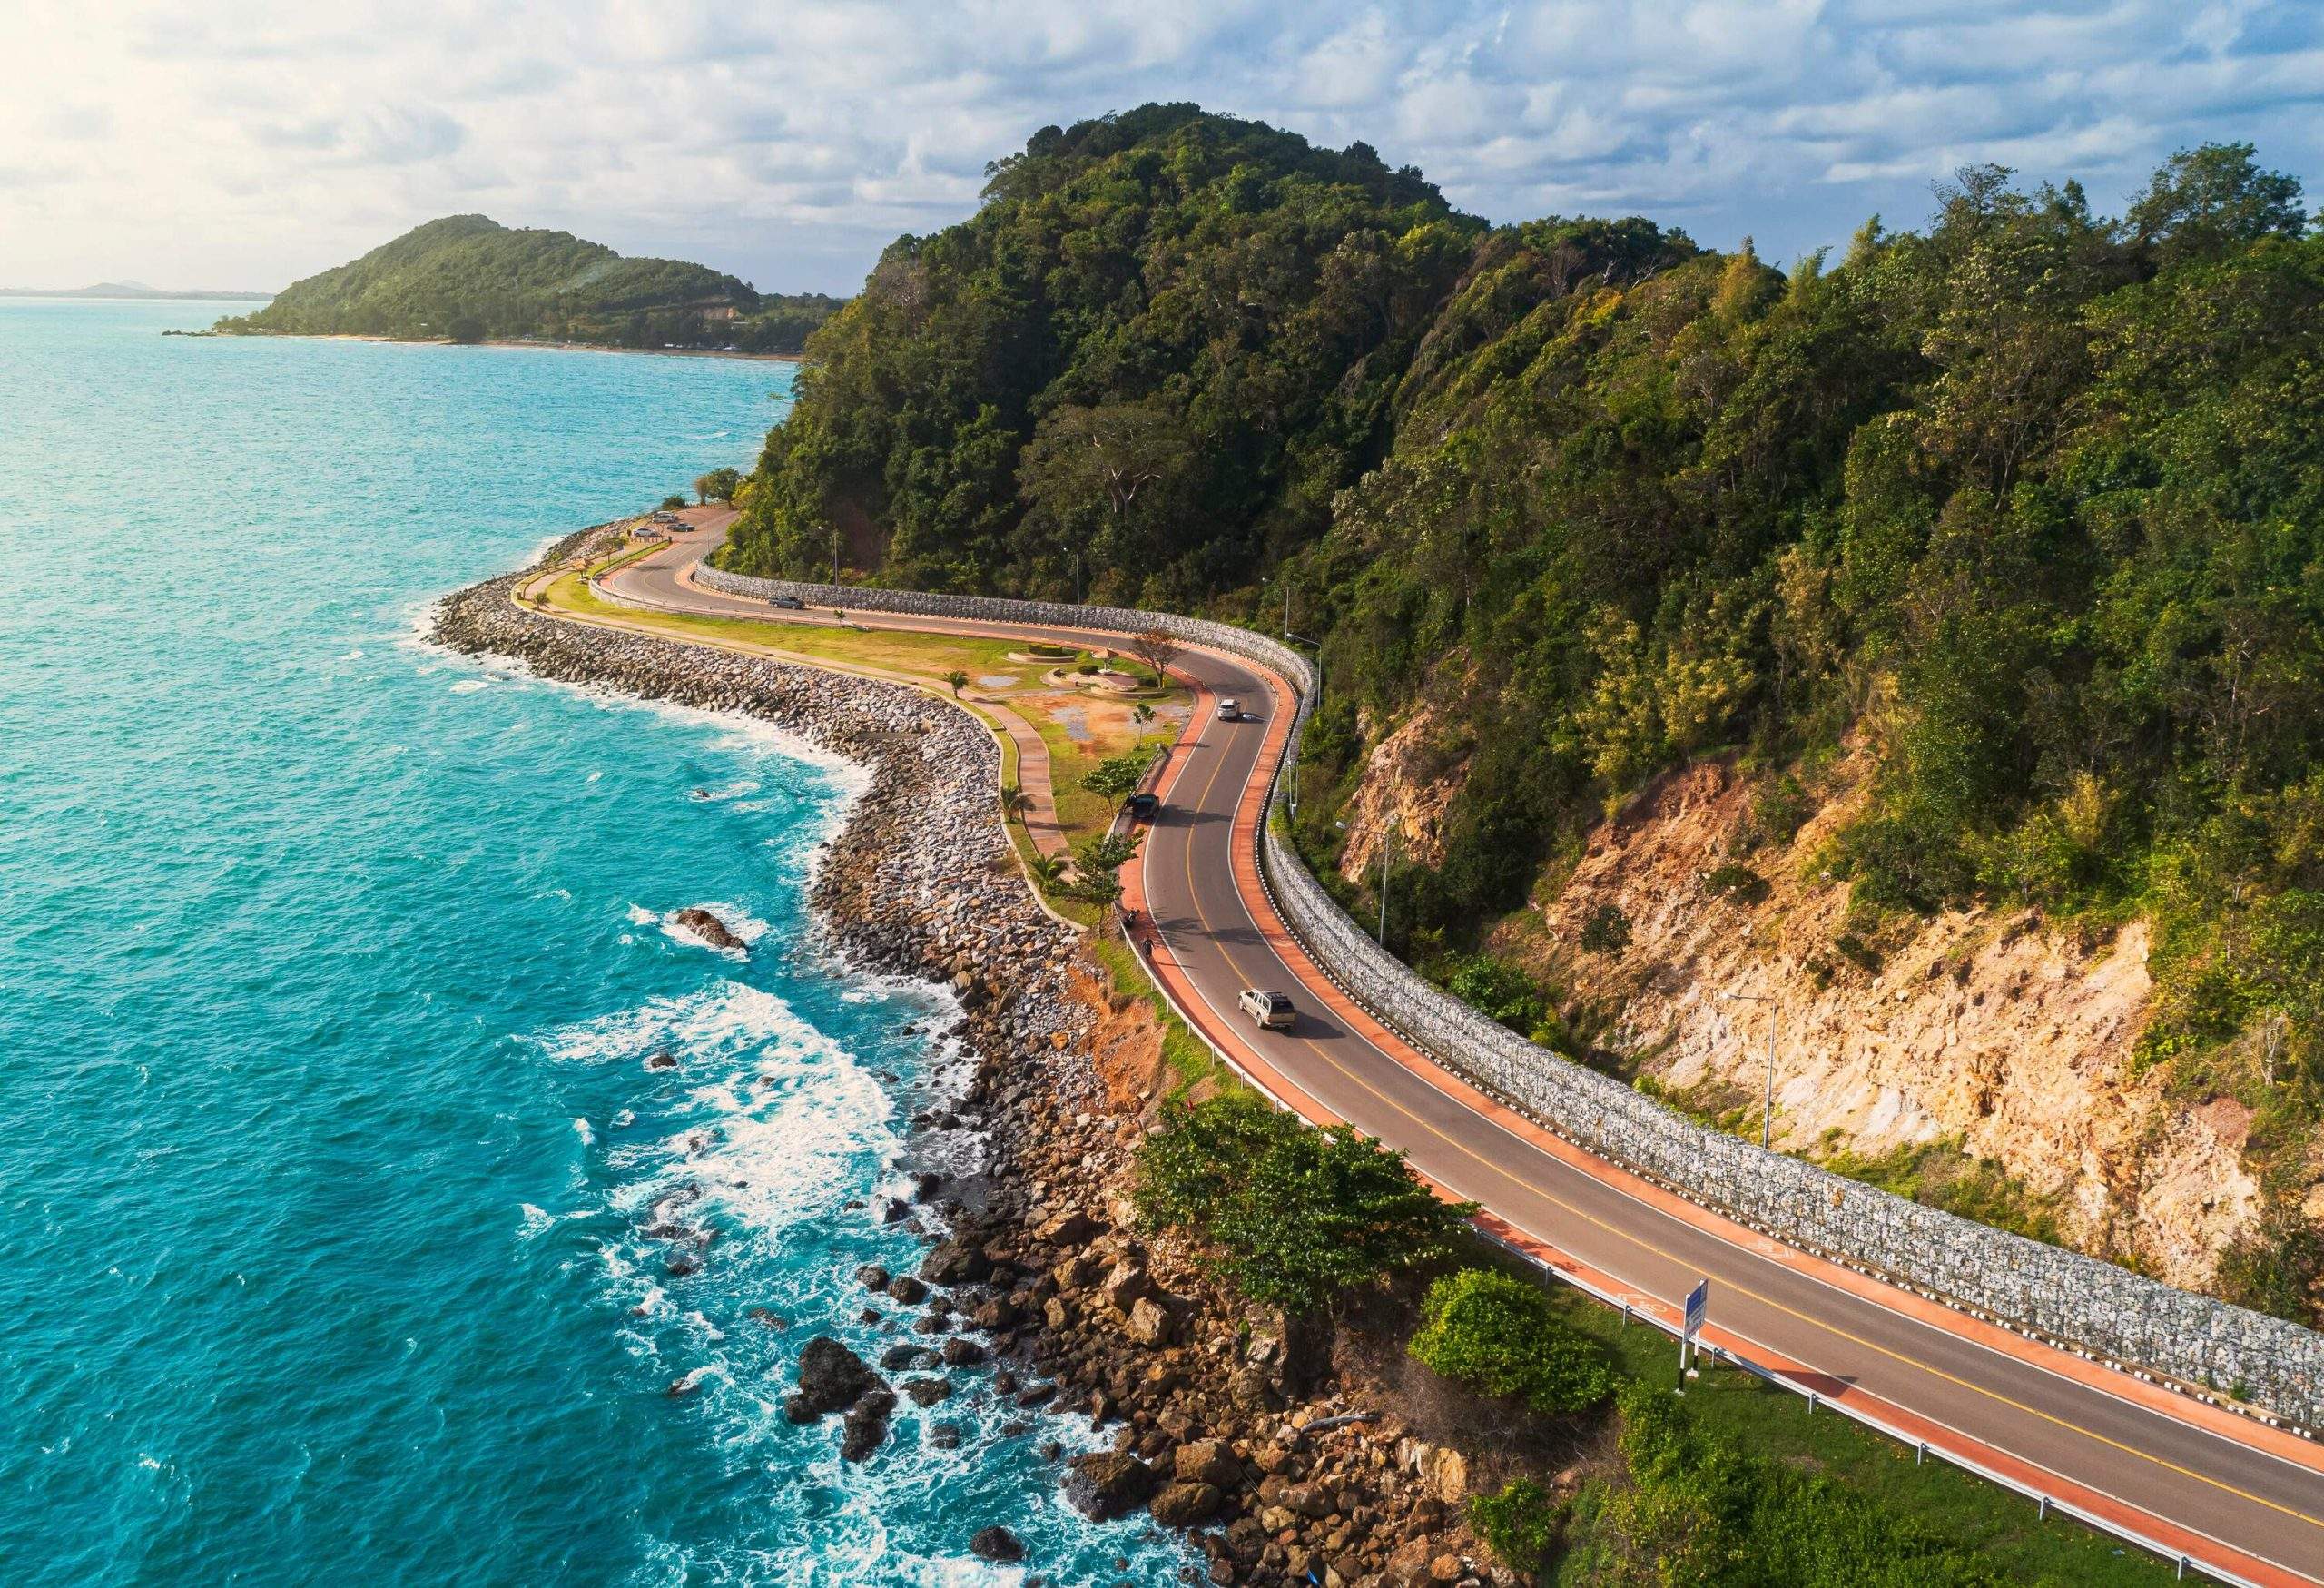 Cars travelling on a coastal road along the forested cliffs with vast ocean views.